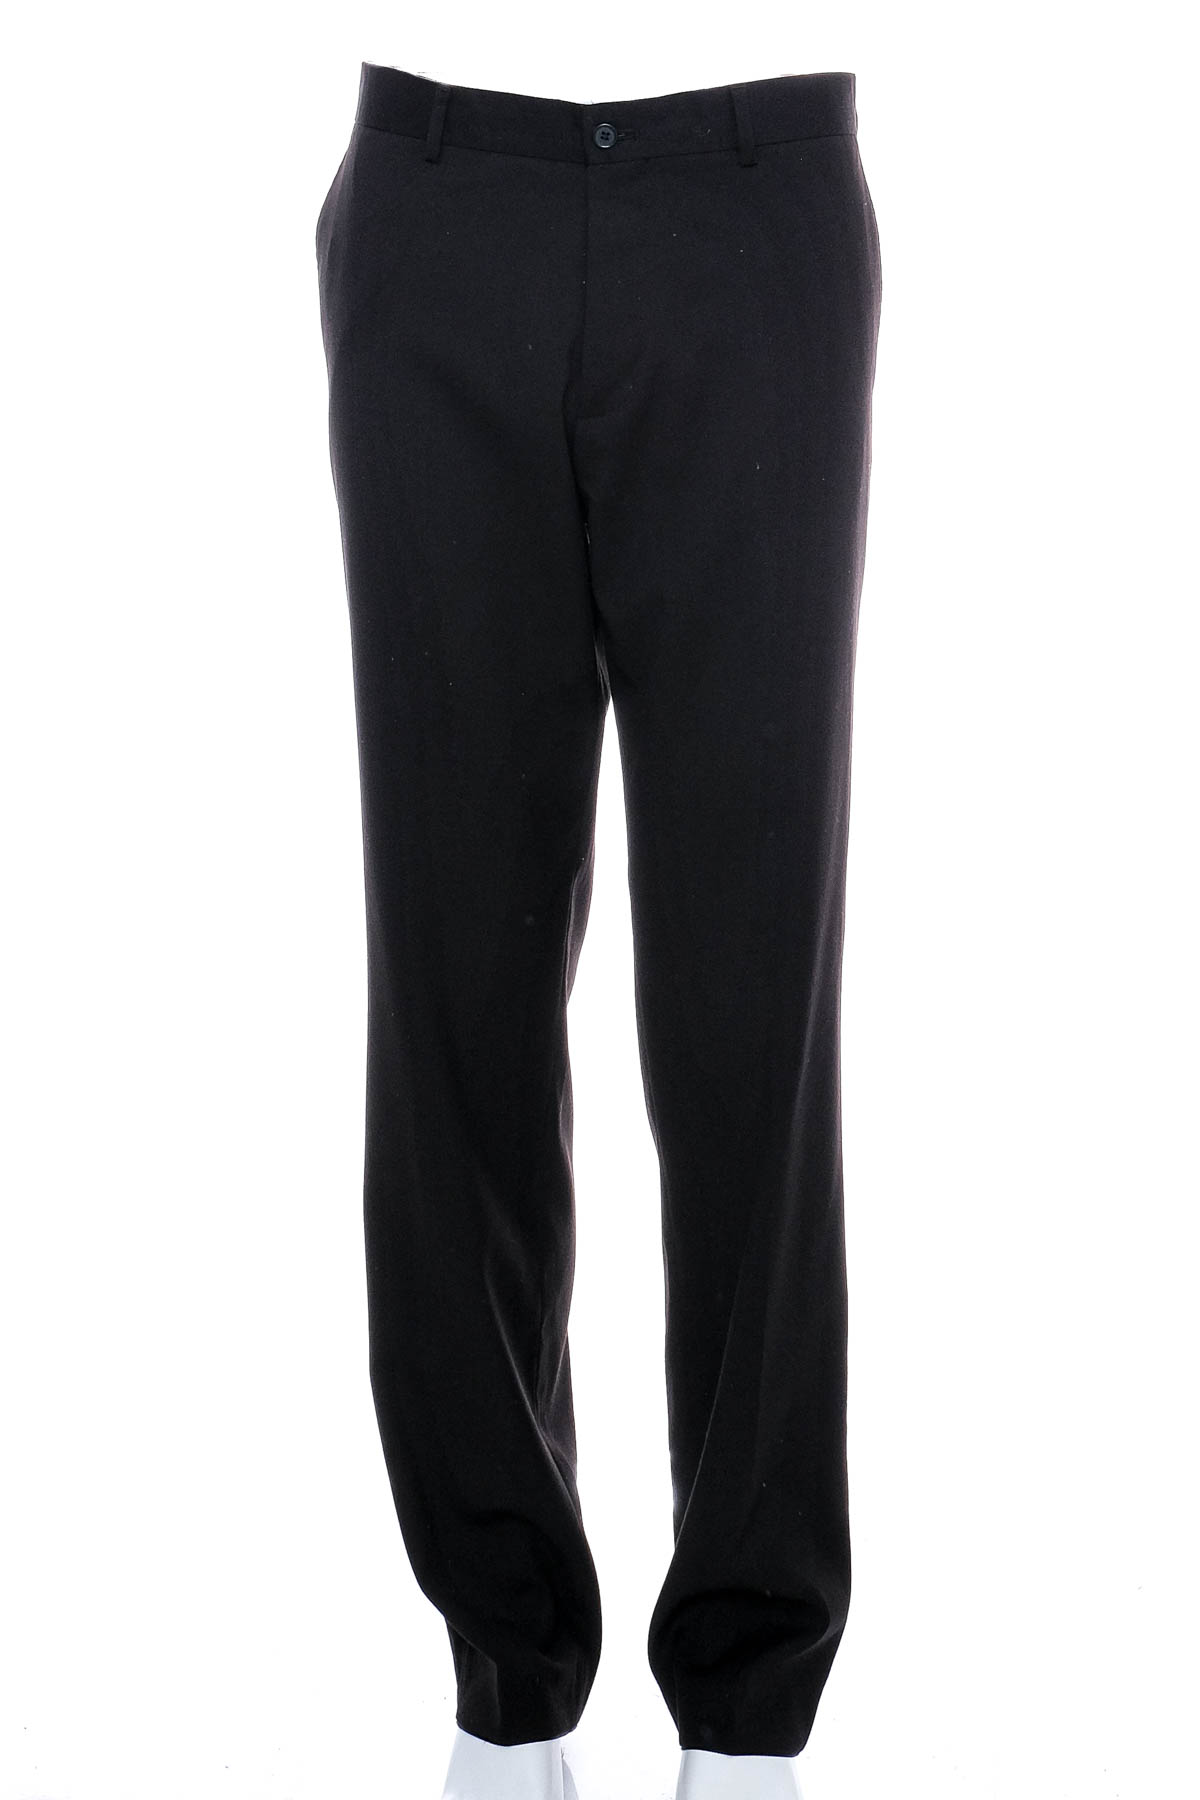 Men's trousers - Coolwater - 0